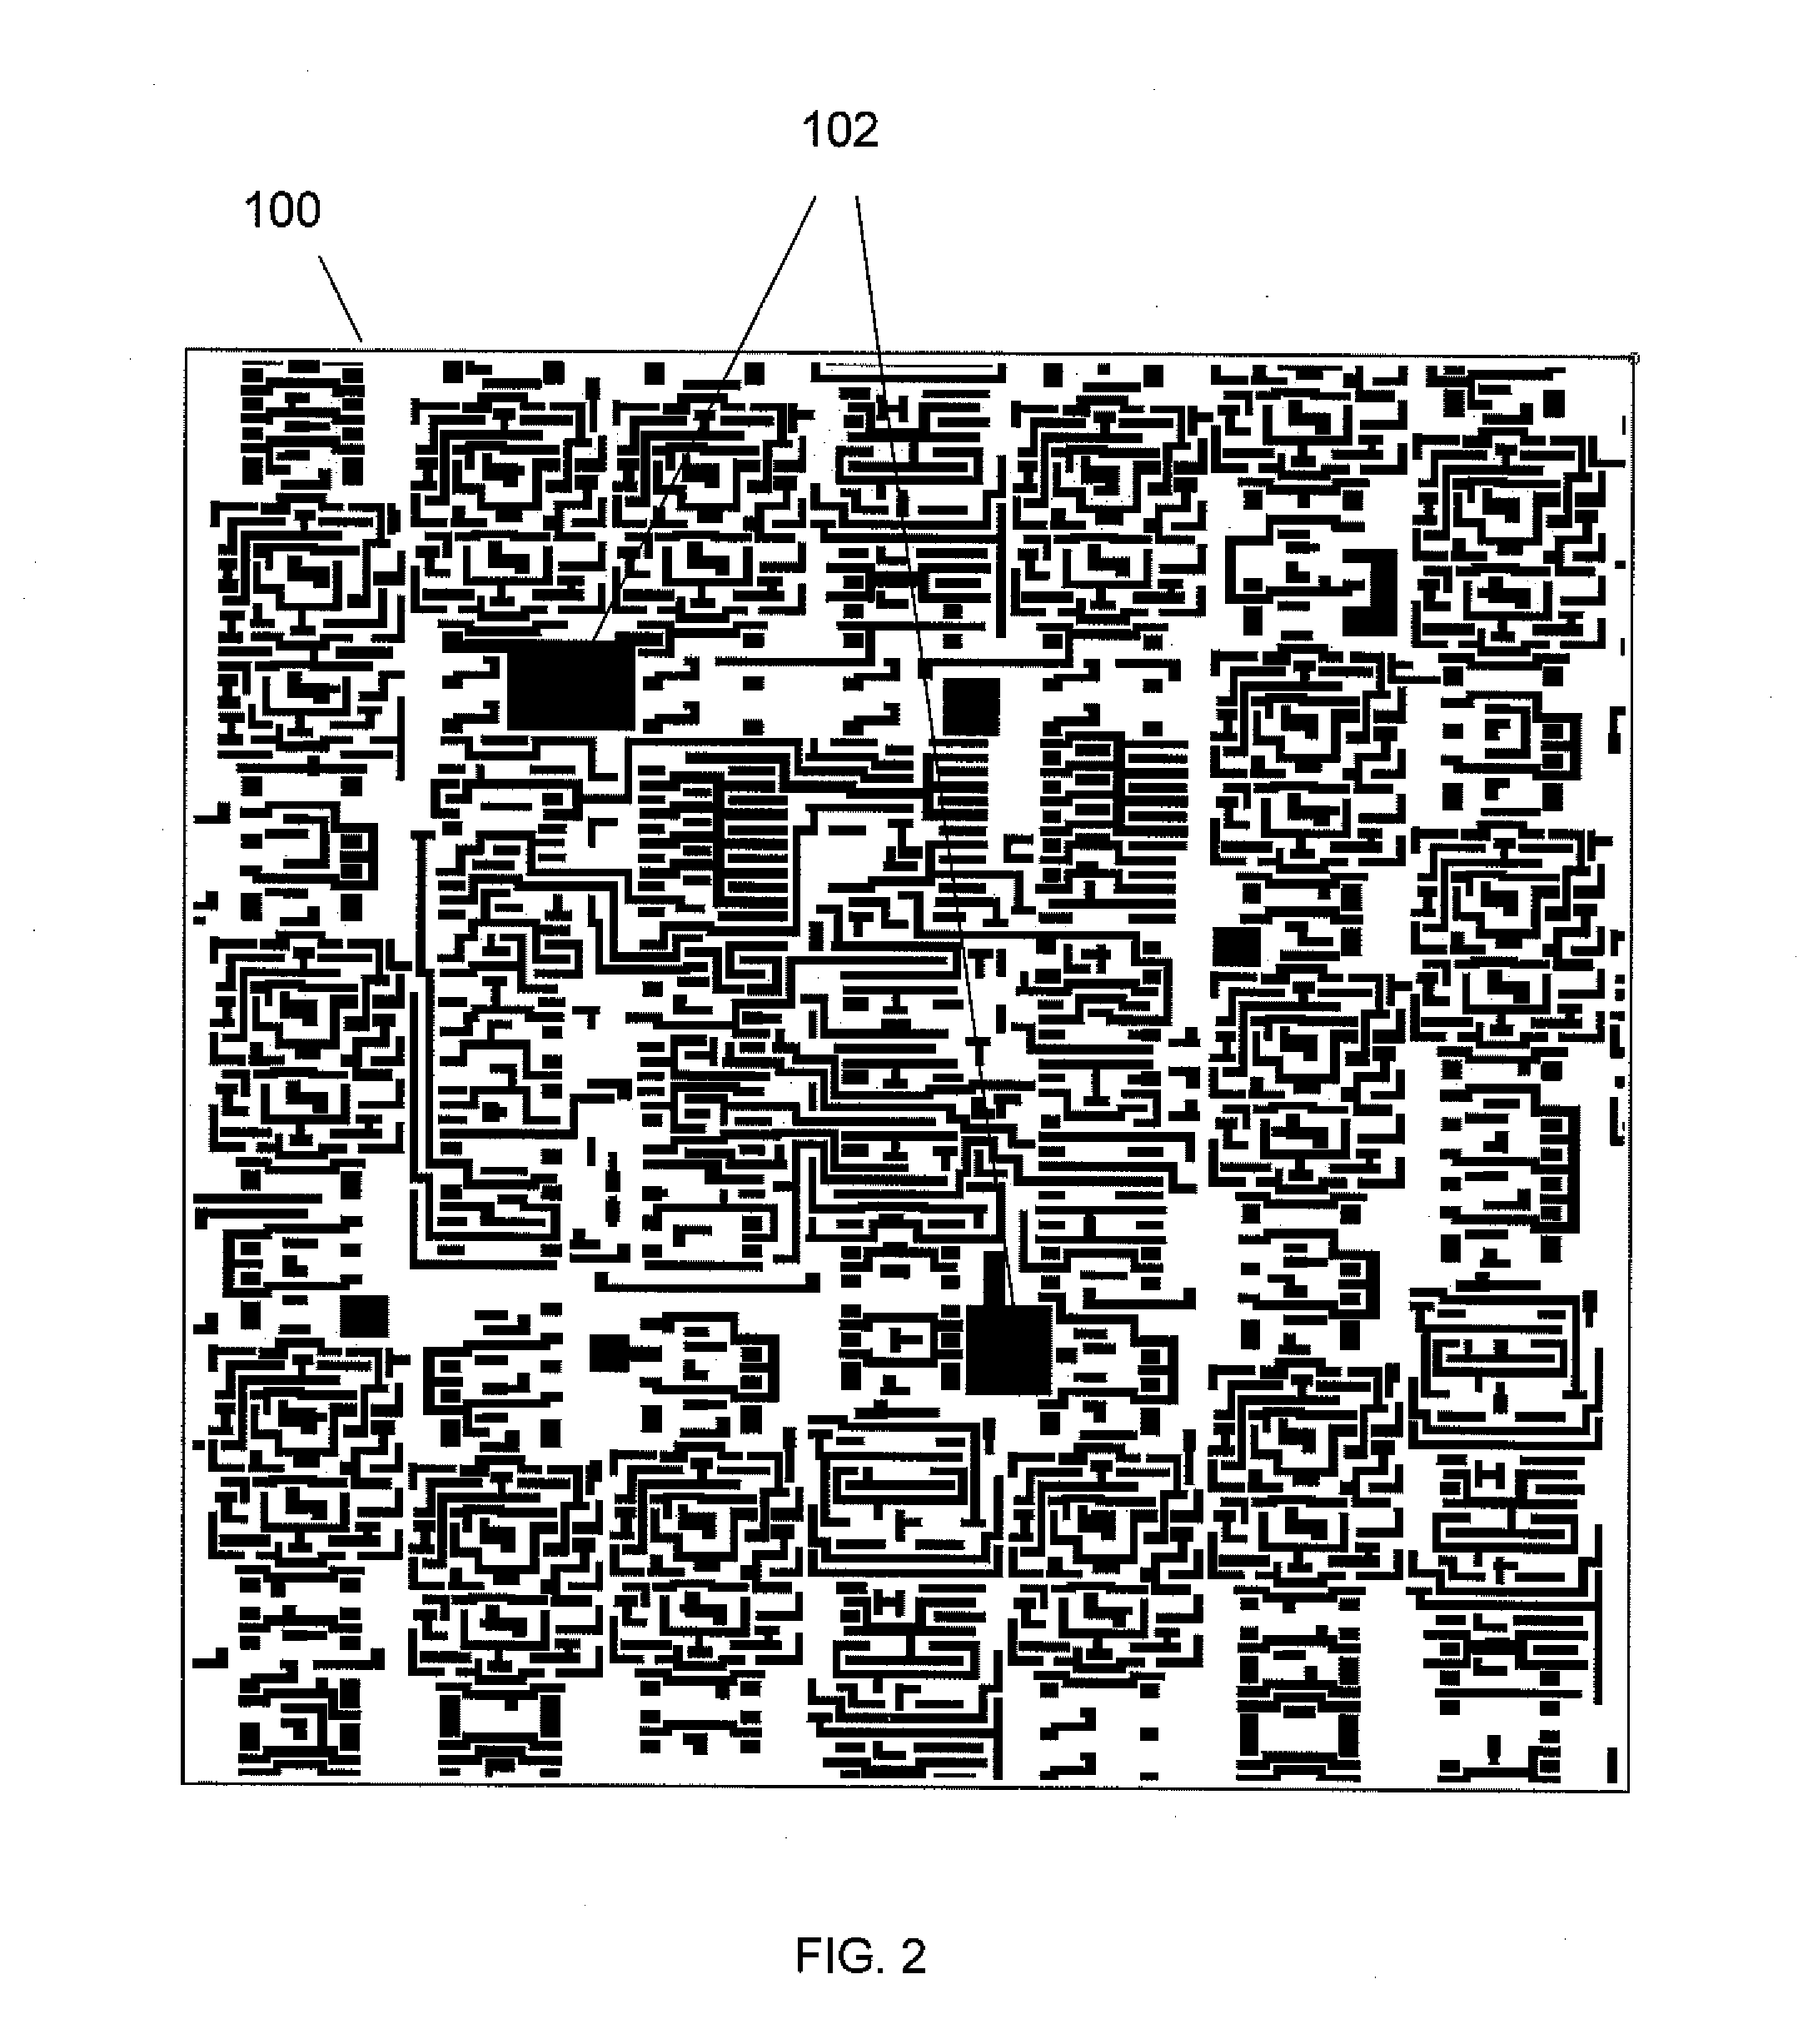 Method and apparatus of rapid determination of problematic areas in VLSI layout by oriented sliver sampling